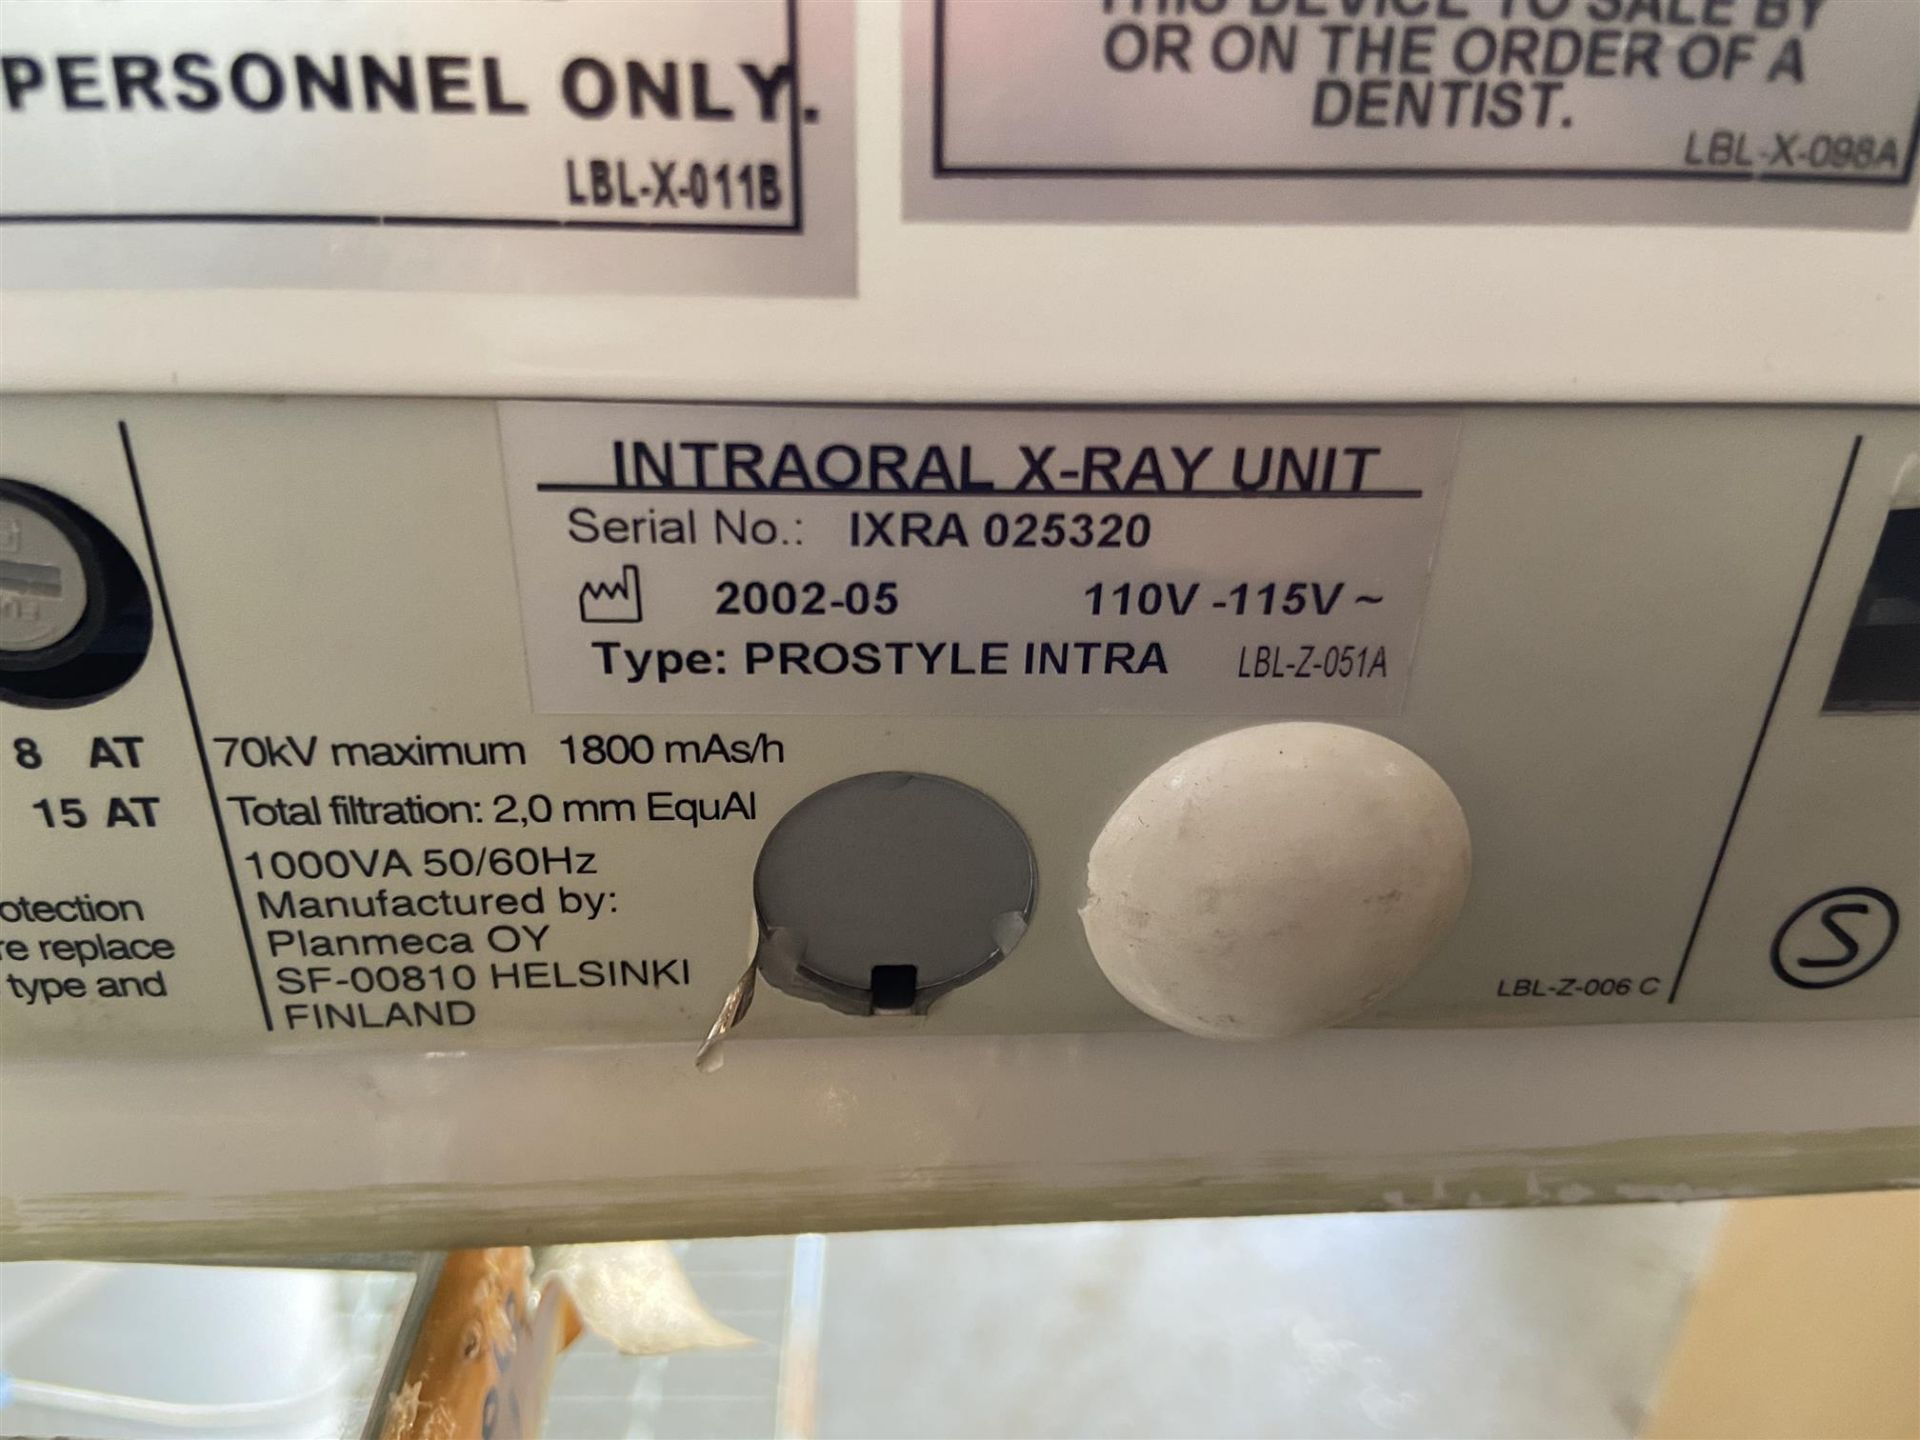 PLANMECA OY, INTRAORAL X-RAY UNIT, PROSTYLE INTRA, - SERIAL # IXRA 025320 - Image 2 of 2